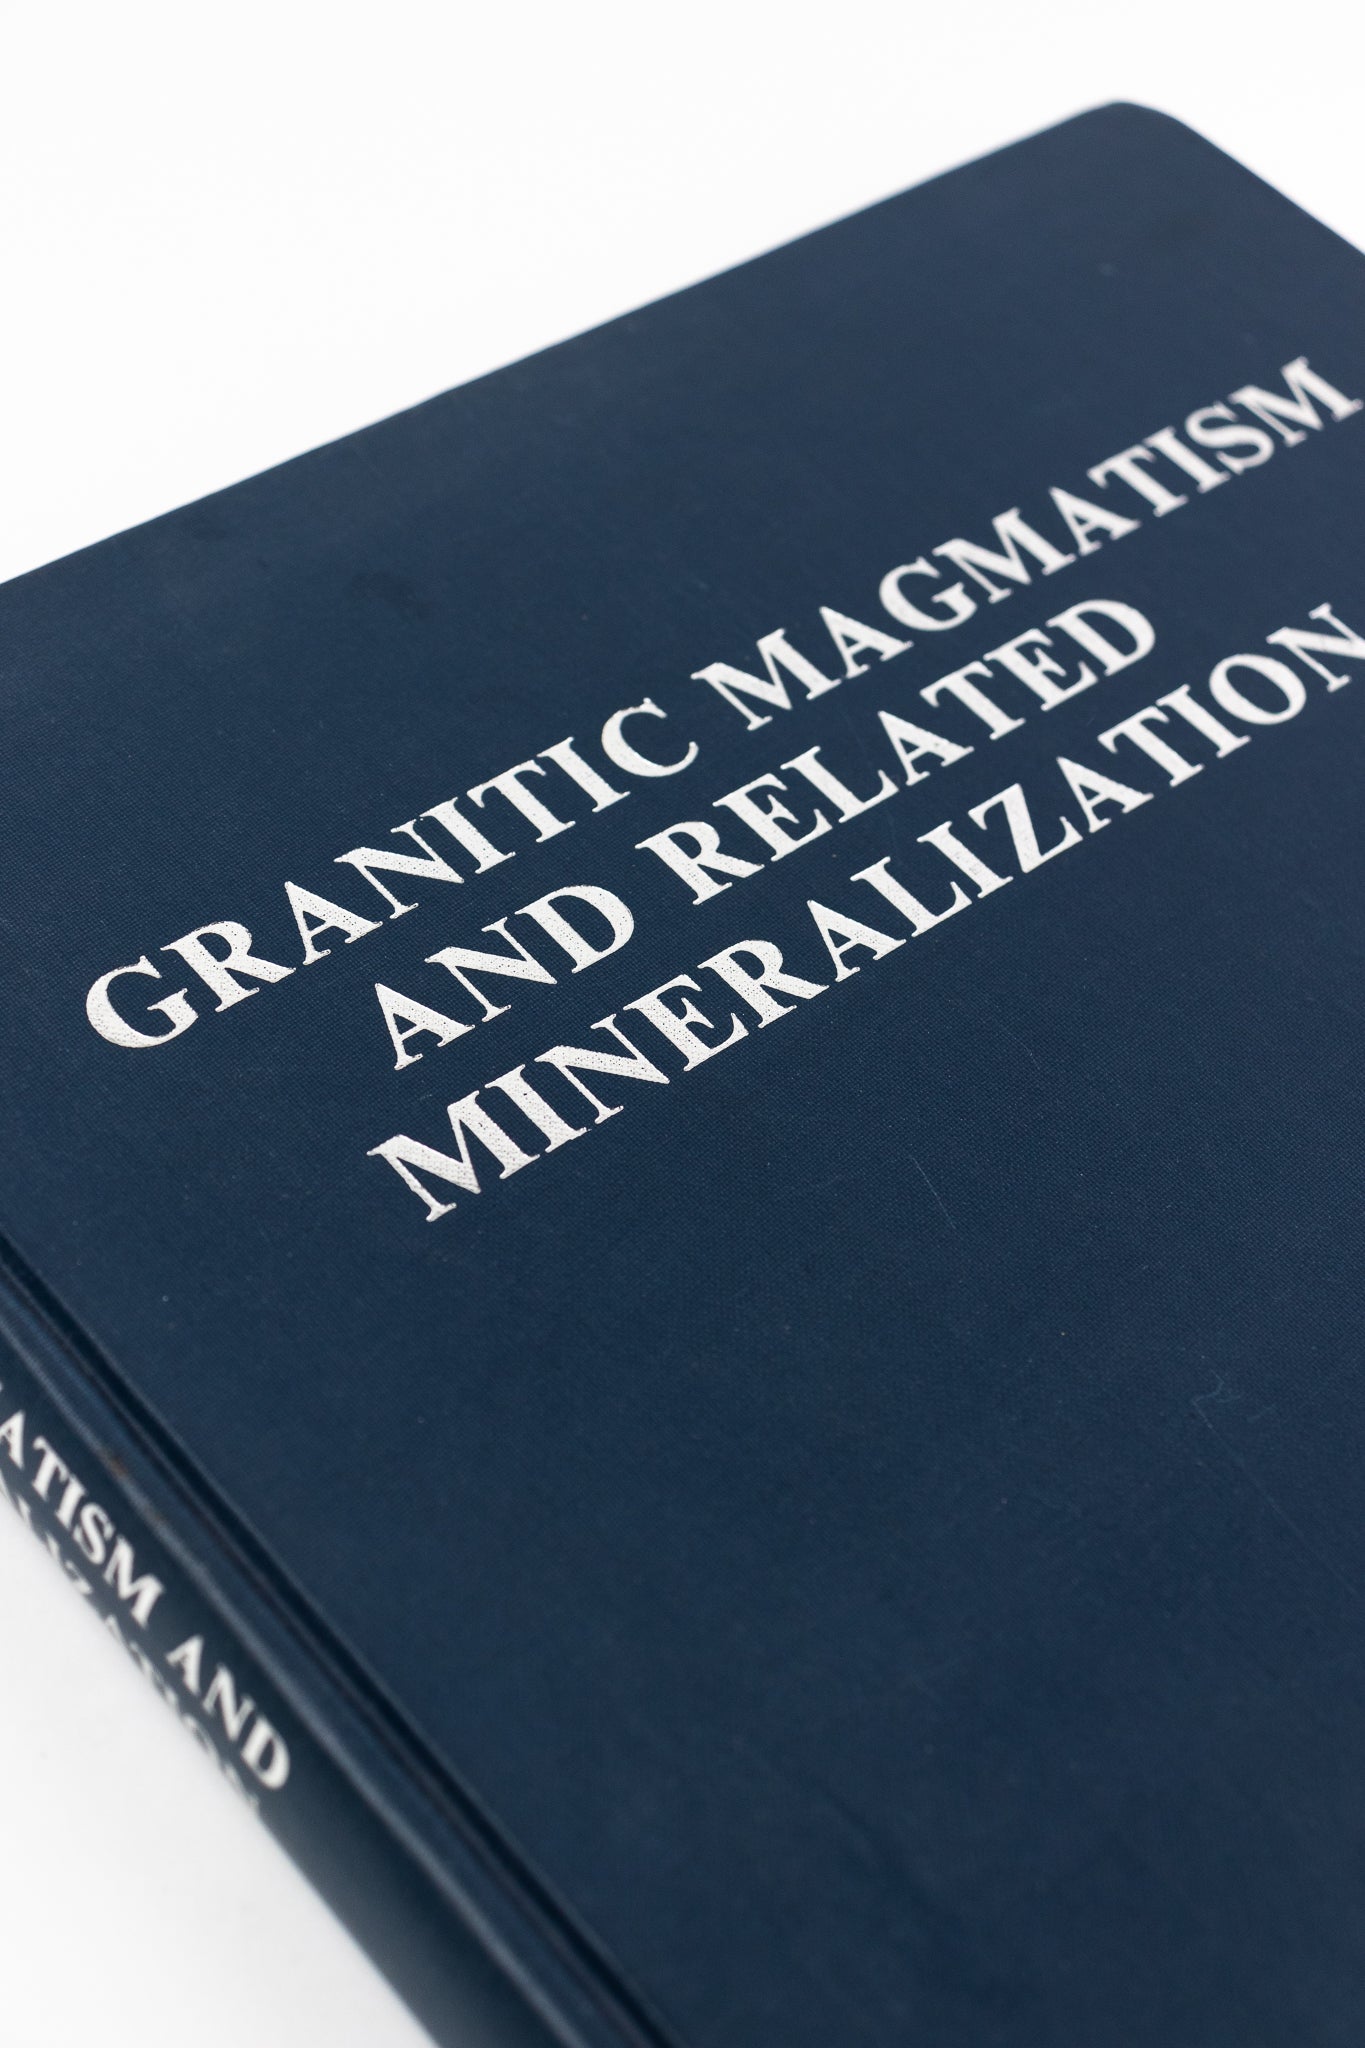 Granitic Magmatism and Related Mineralization - Stemcell Science Shop